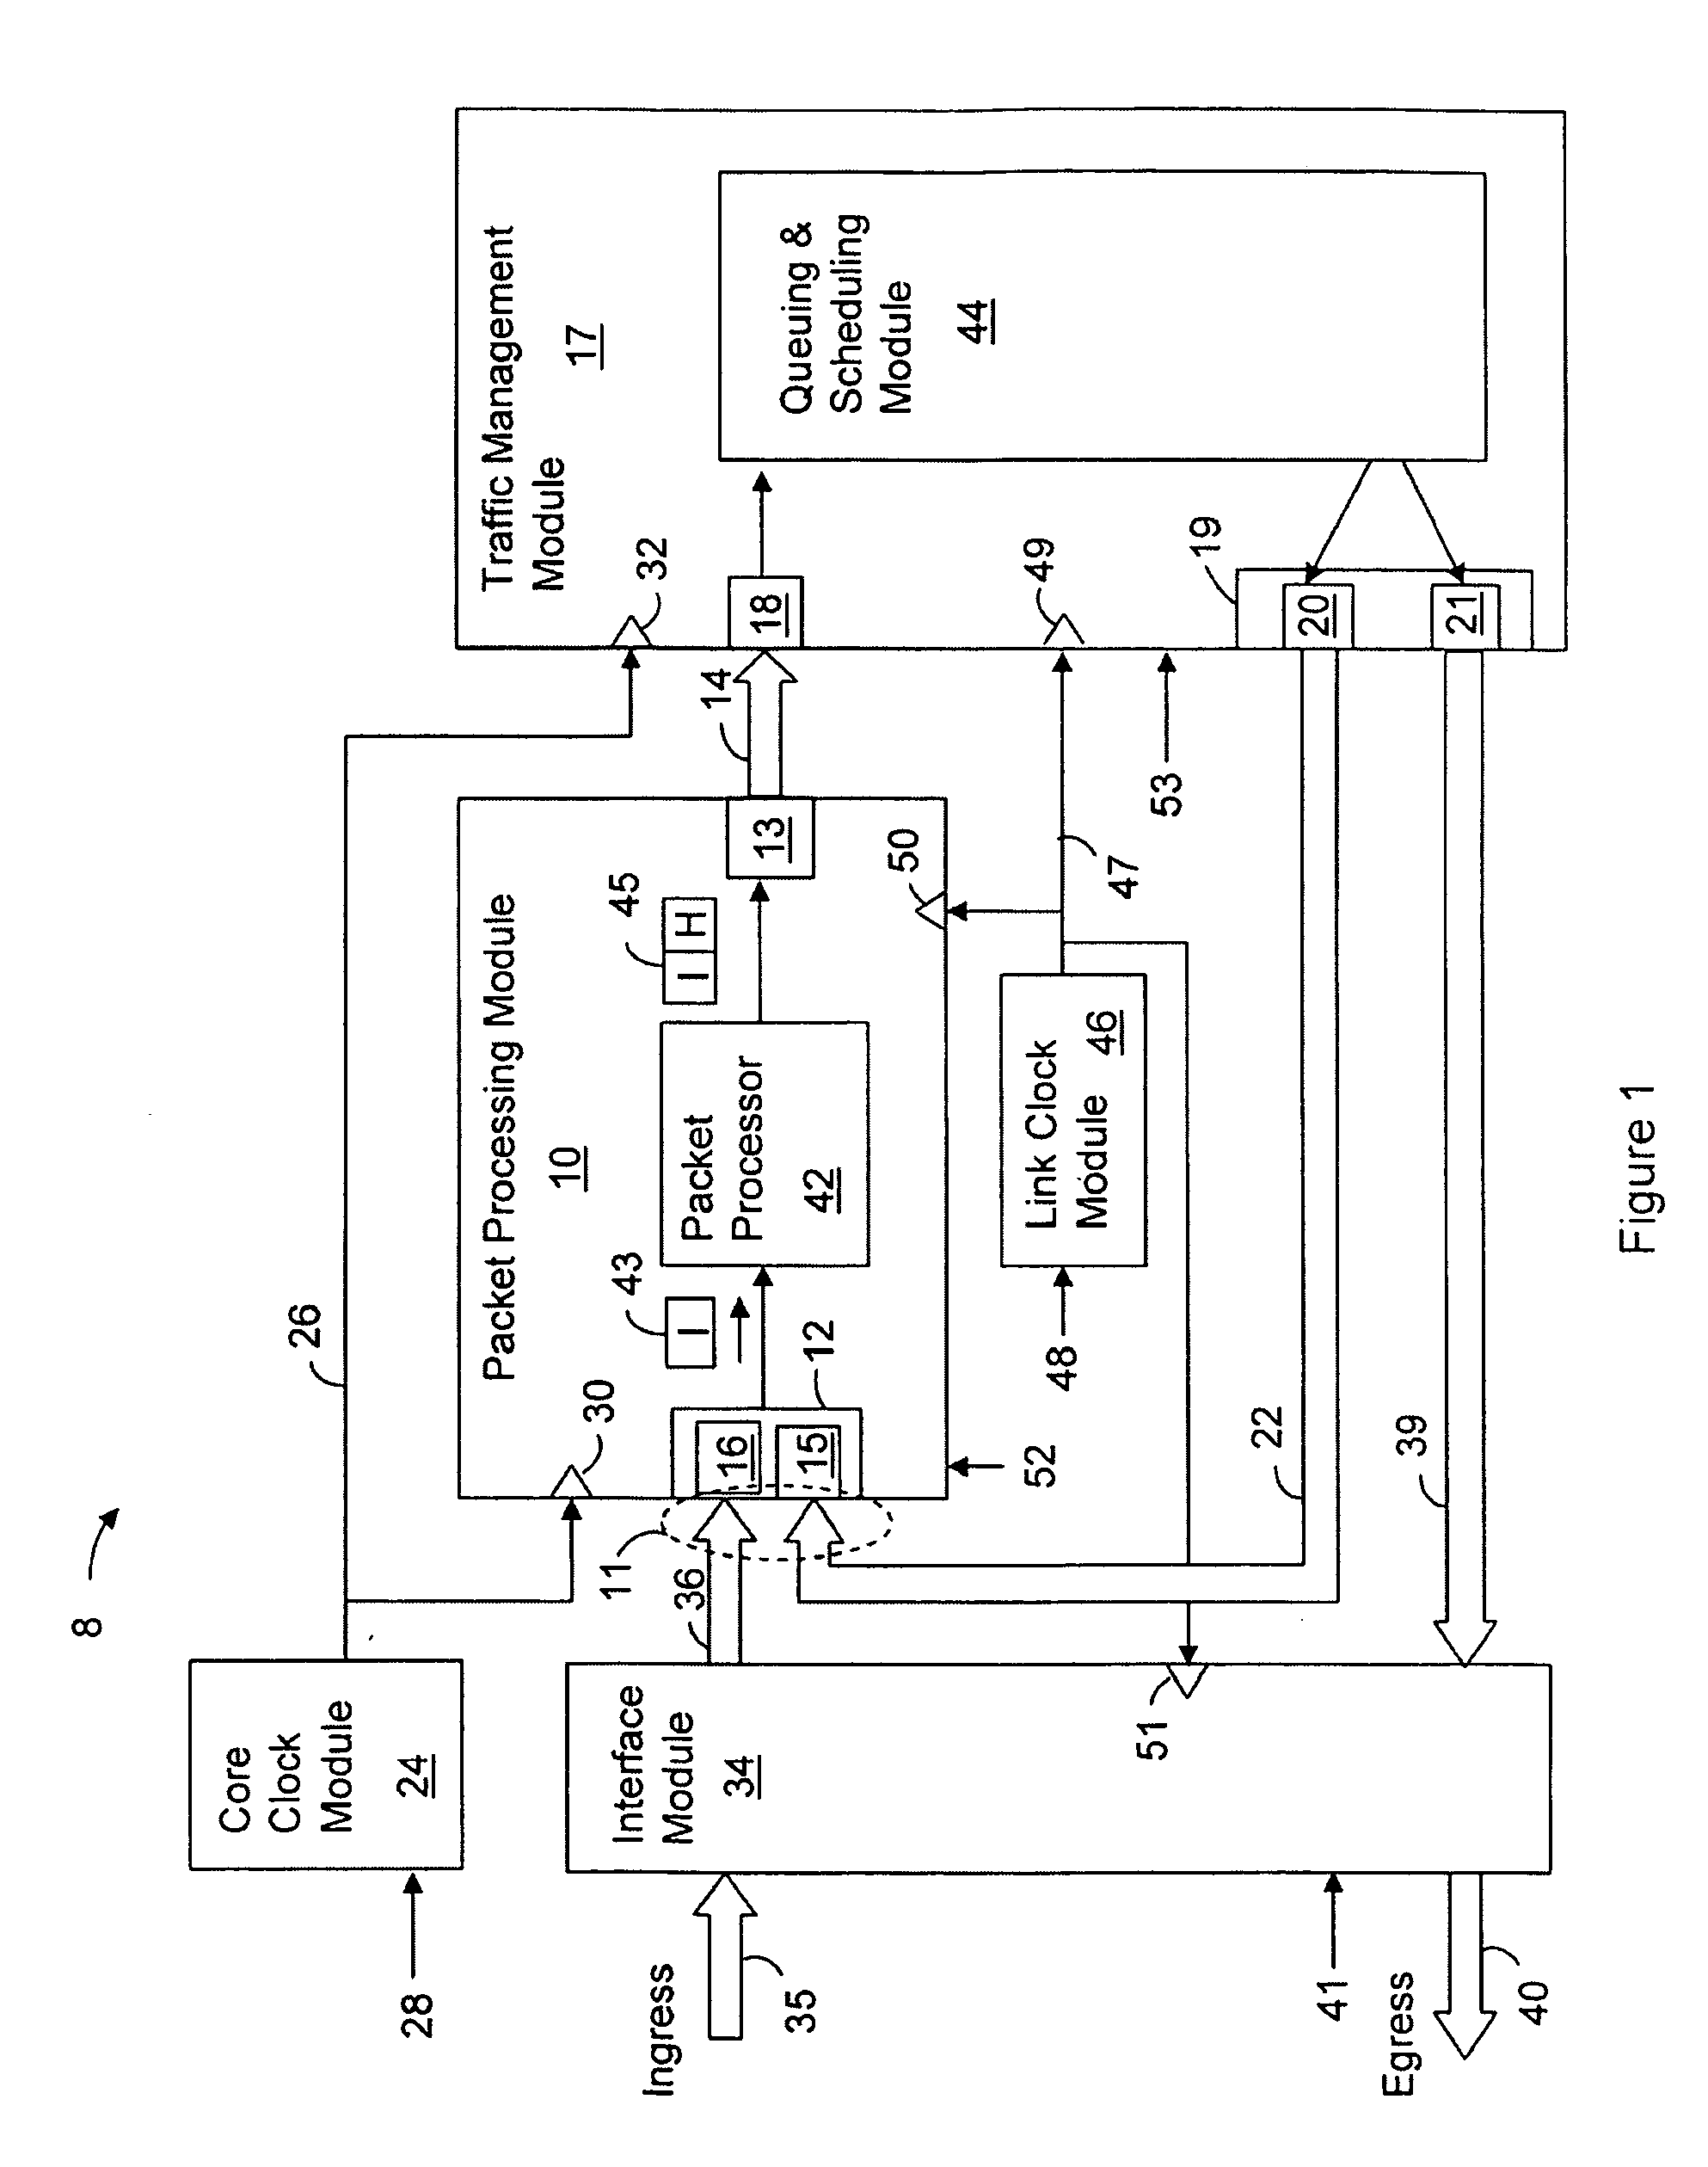 Thermally flexible and performance scalable packet processing circuit card